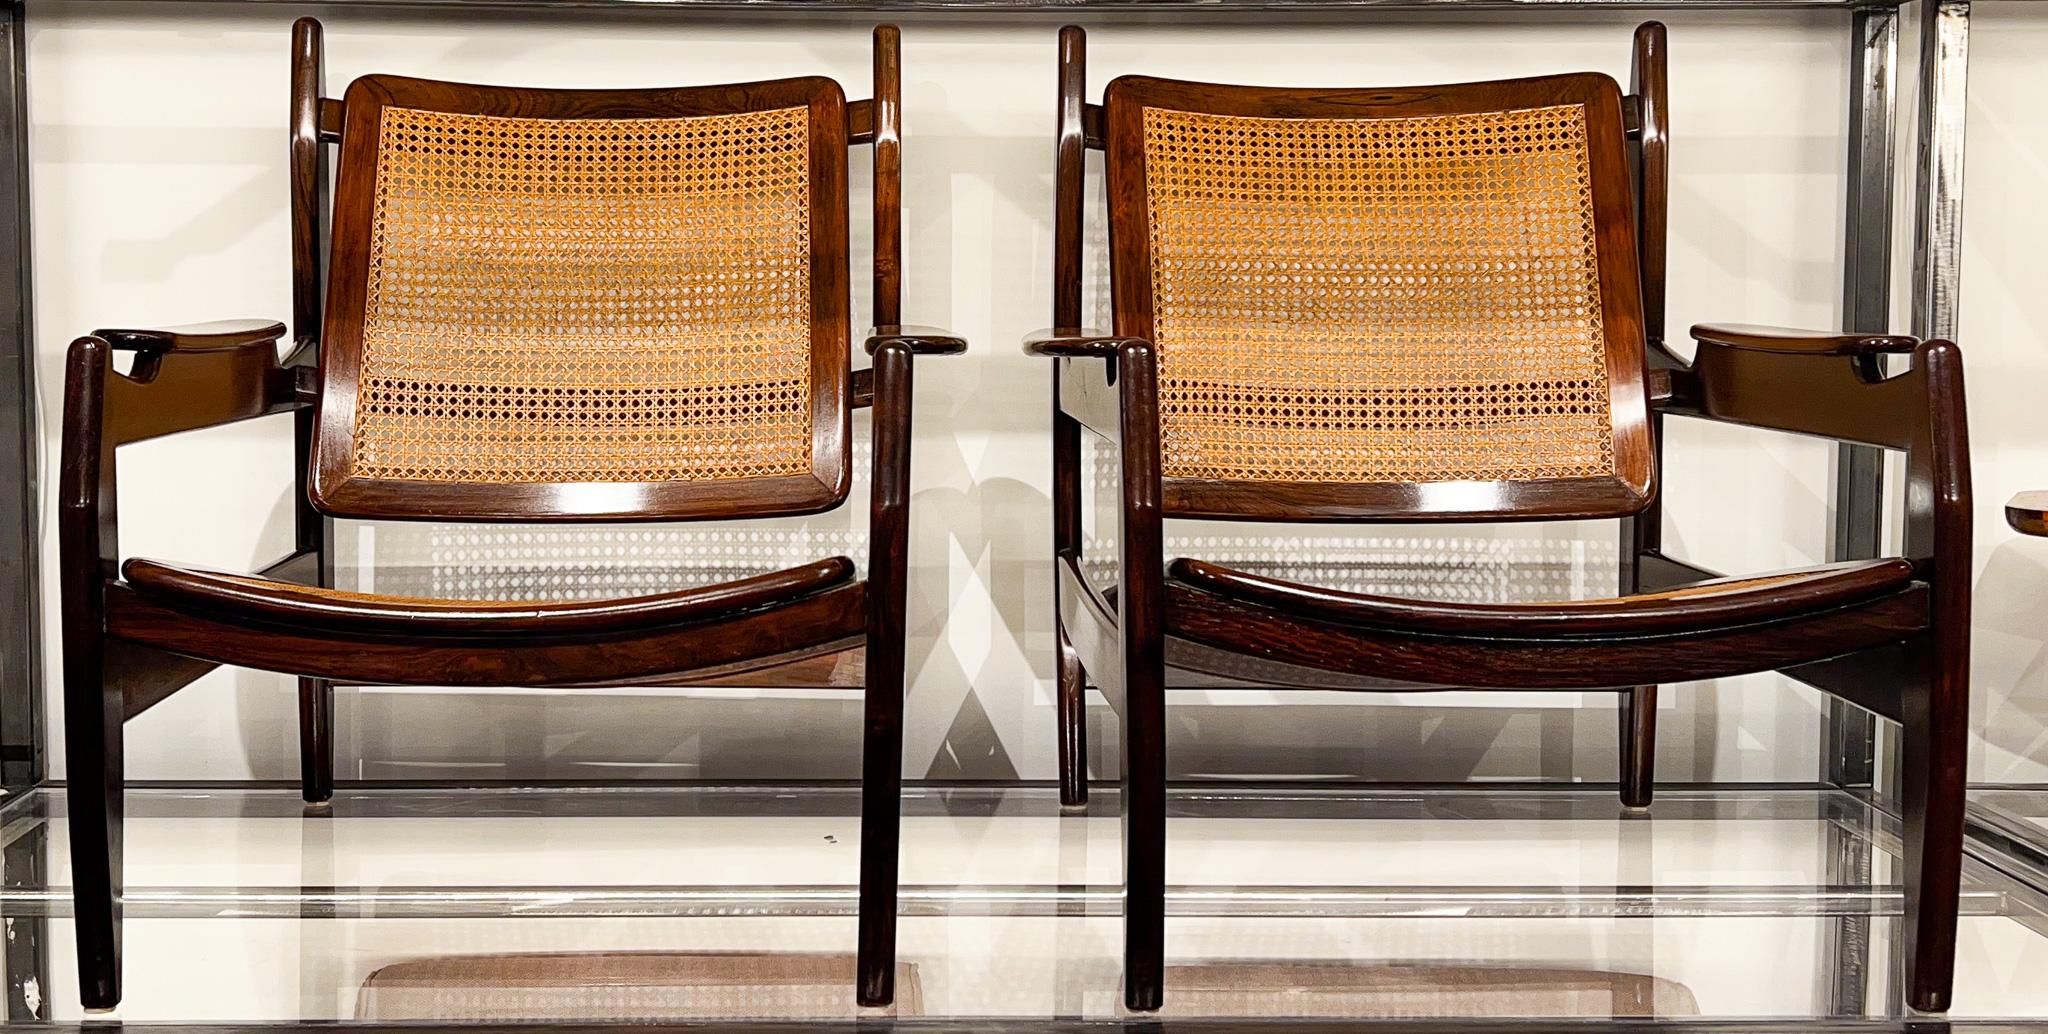 These beautifully designed armchairs by Alexander Rapoport are made in solid Brazilian rosewood (Jacaranda) and still conserve their original caning from the 1960s. Both the rosewood and cane are in excellent condition, making the chairs sturdy and